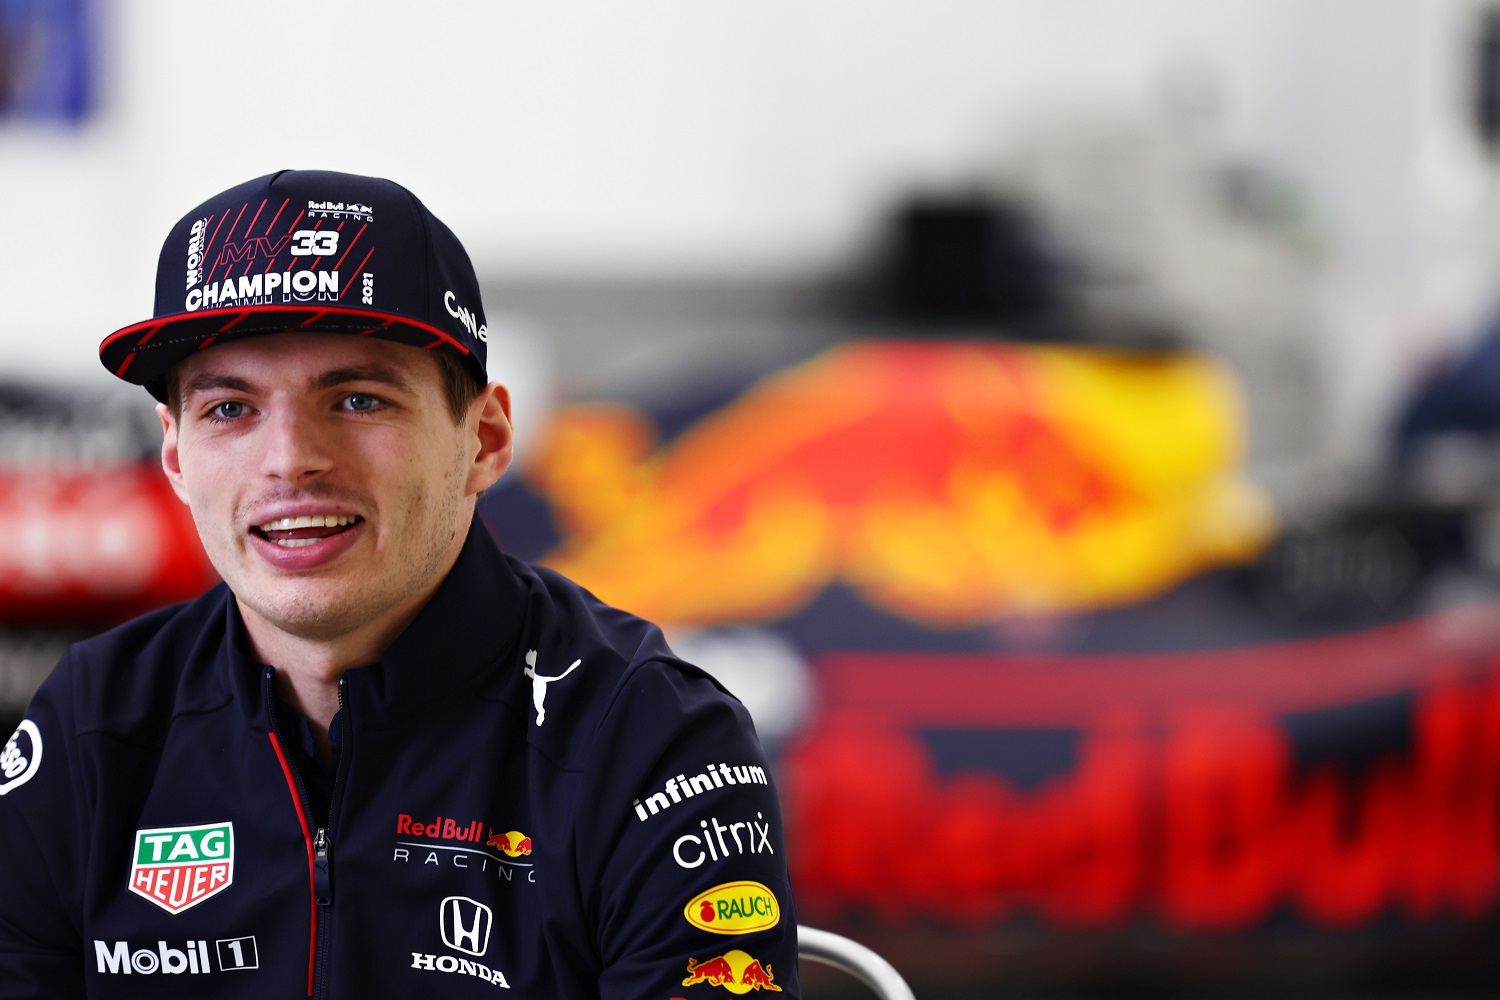 World Drivers' Champion Max Verstappen talks to the media at Red Bull Racing Factory on Dec. 15, 2021, in Milton Keynes, England. | Mark Thompson/Getty Images